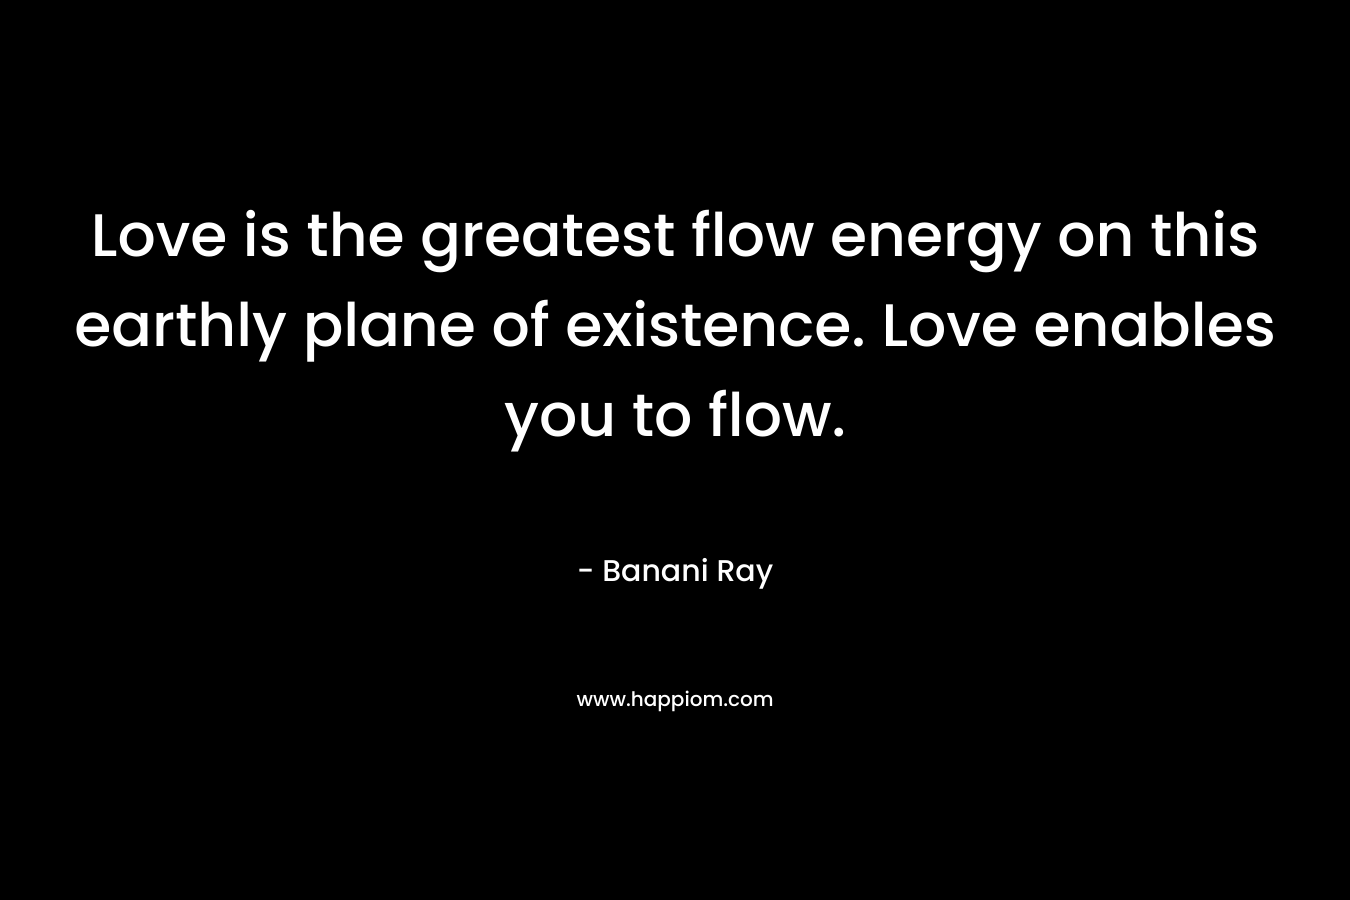 Love is the greatest flow energy on this earthly plane of existence. Love enables you to flow.